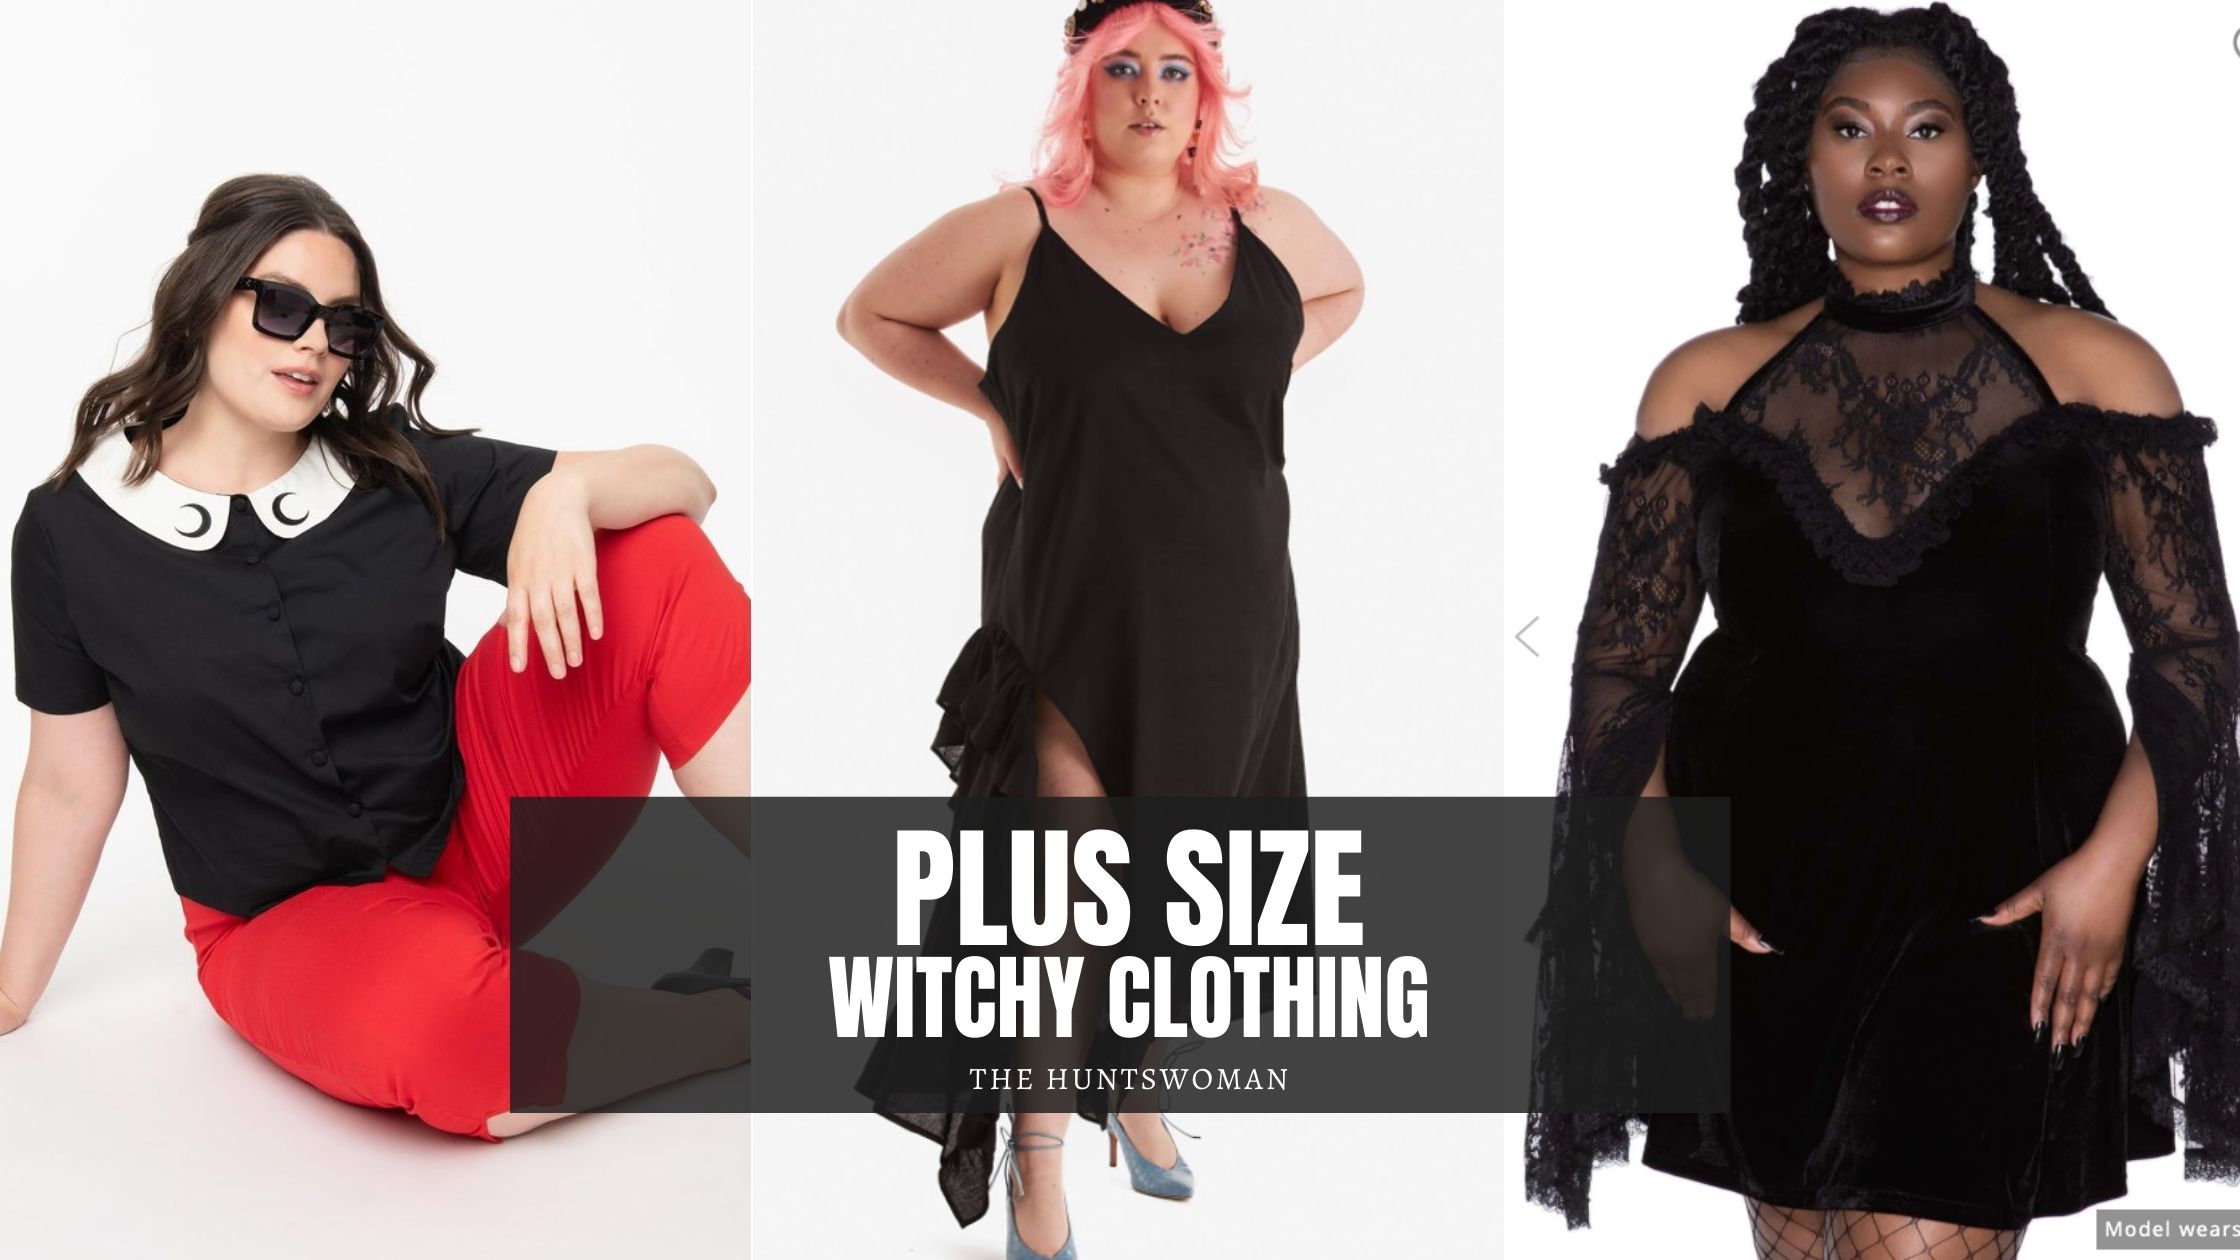 Shop for Plus Size Witchy Clothing ...